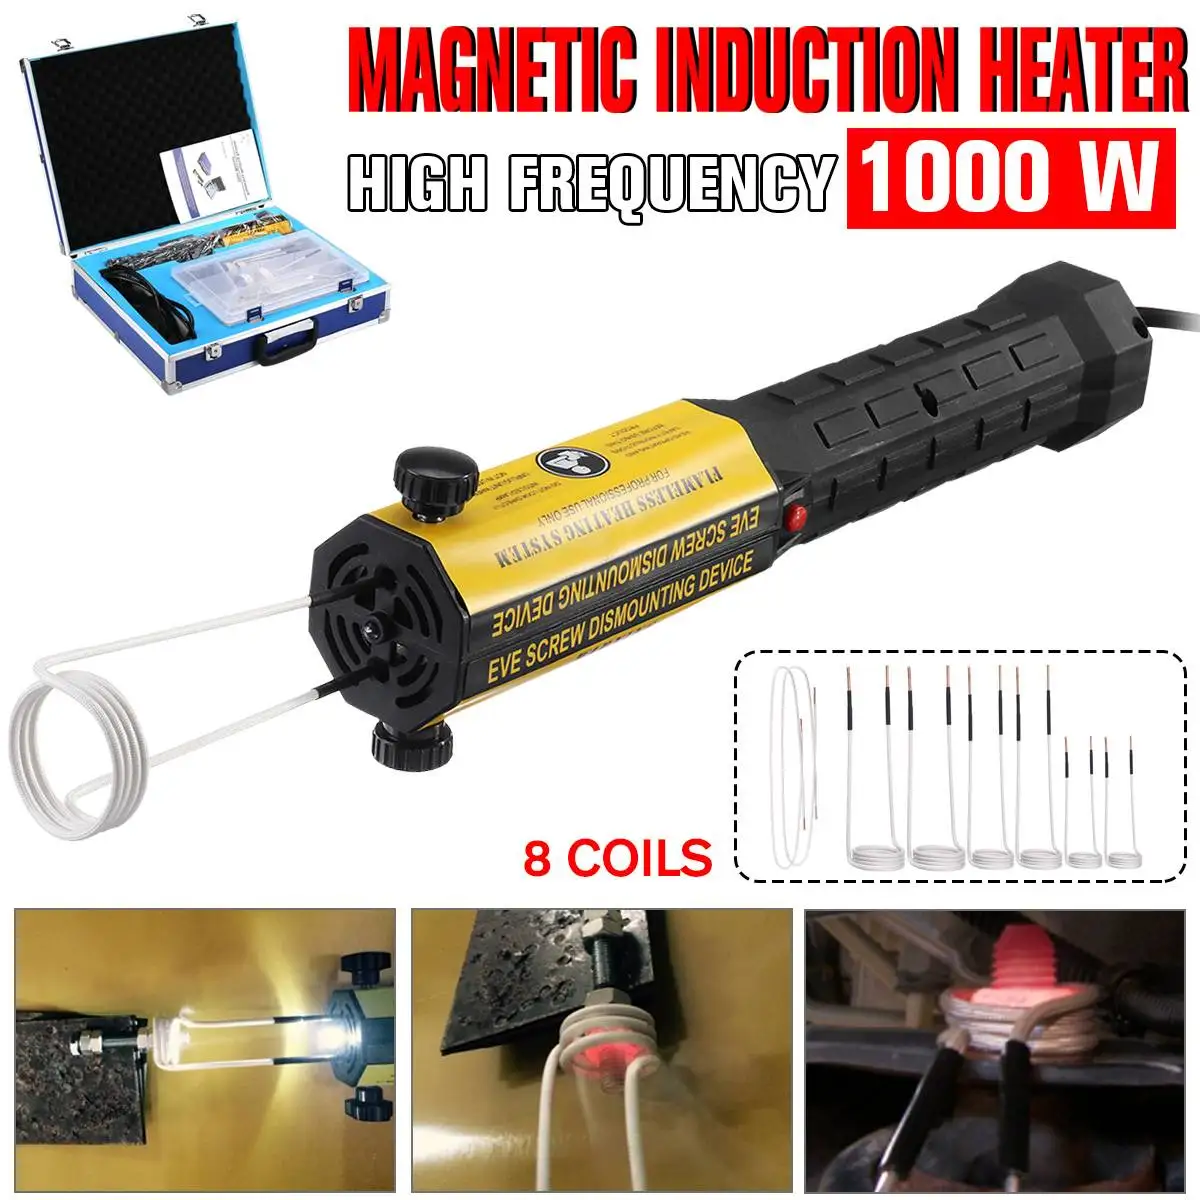 Hand Held Induction Ductor Magnetic Heater Bolt Remover Tool Flameless Heat New 